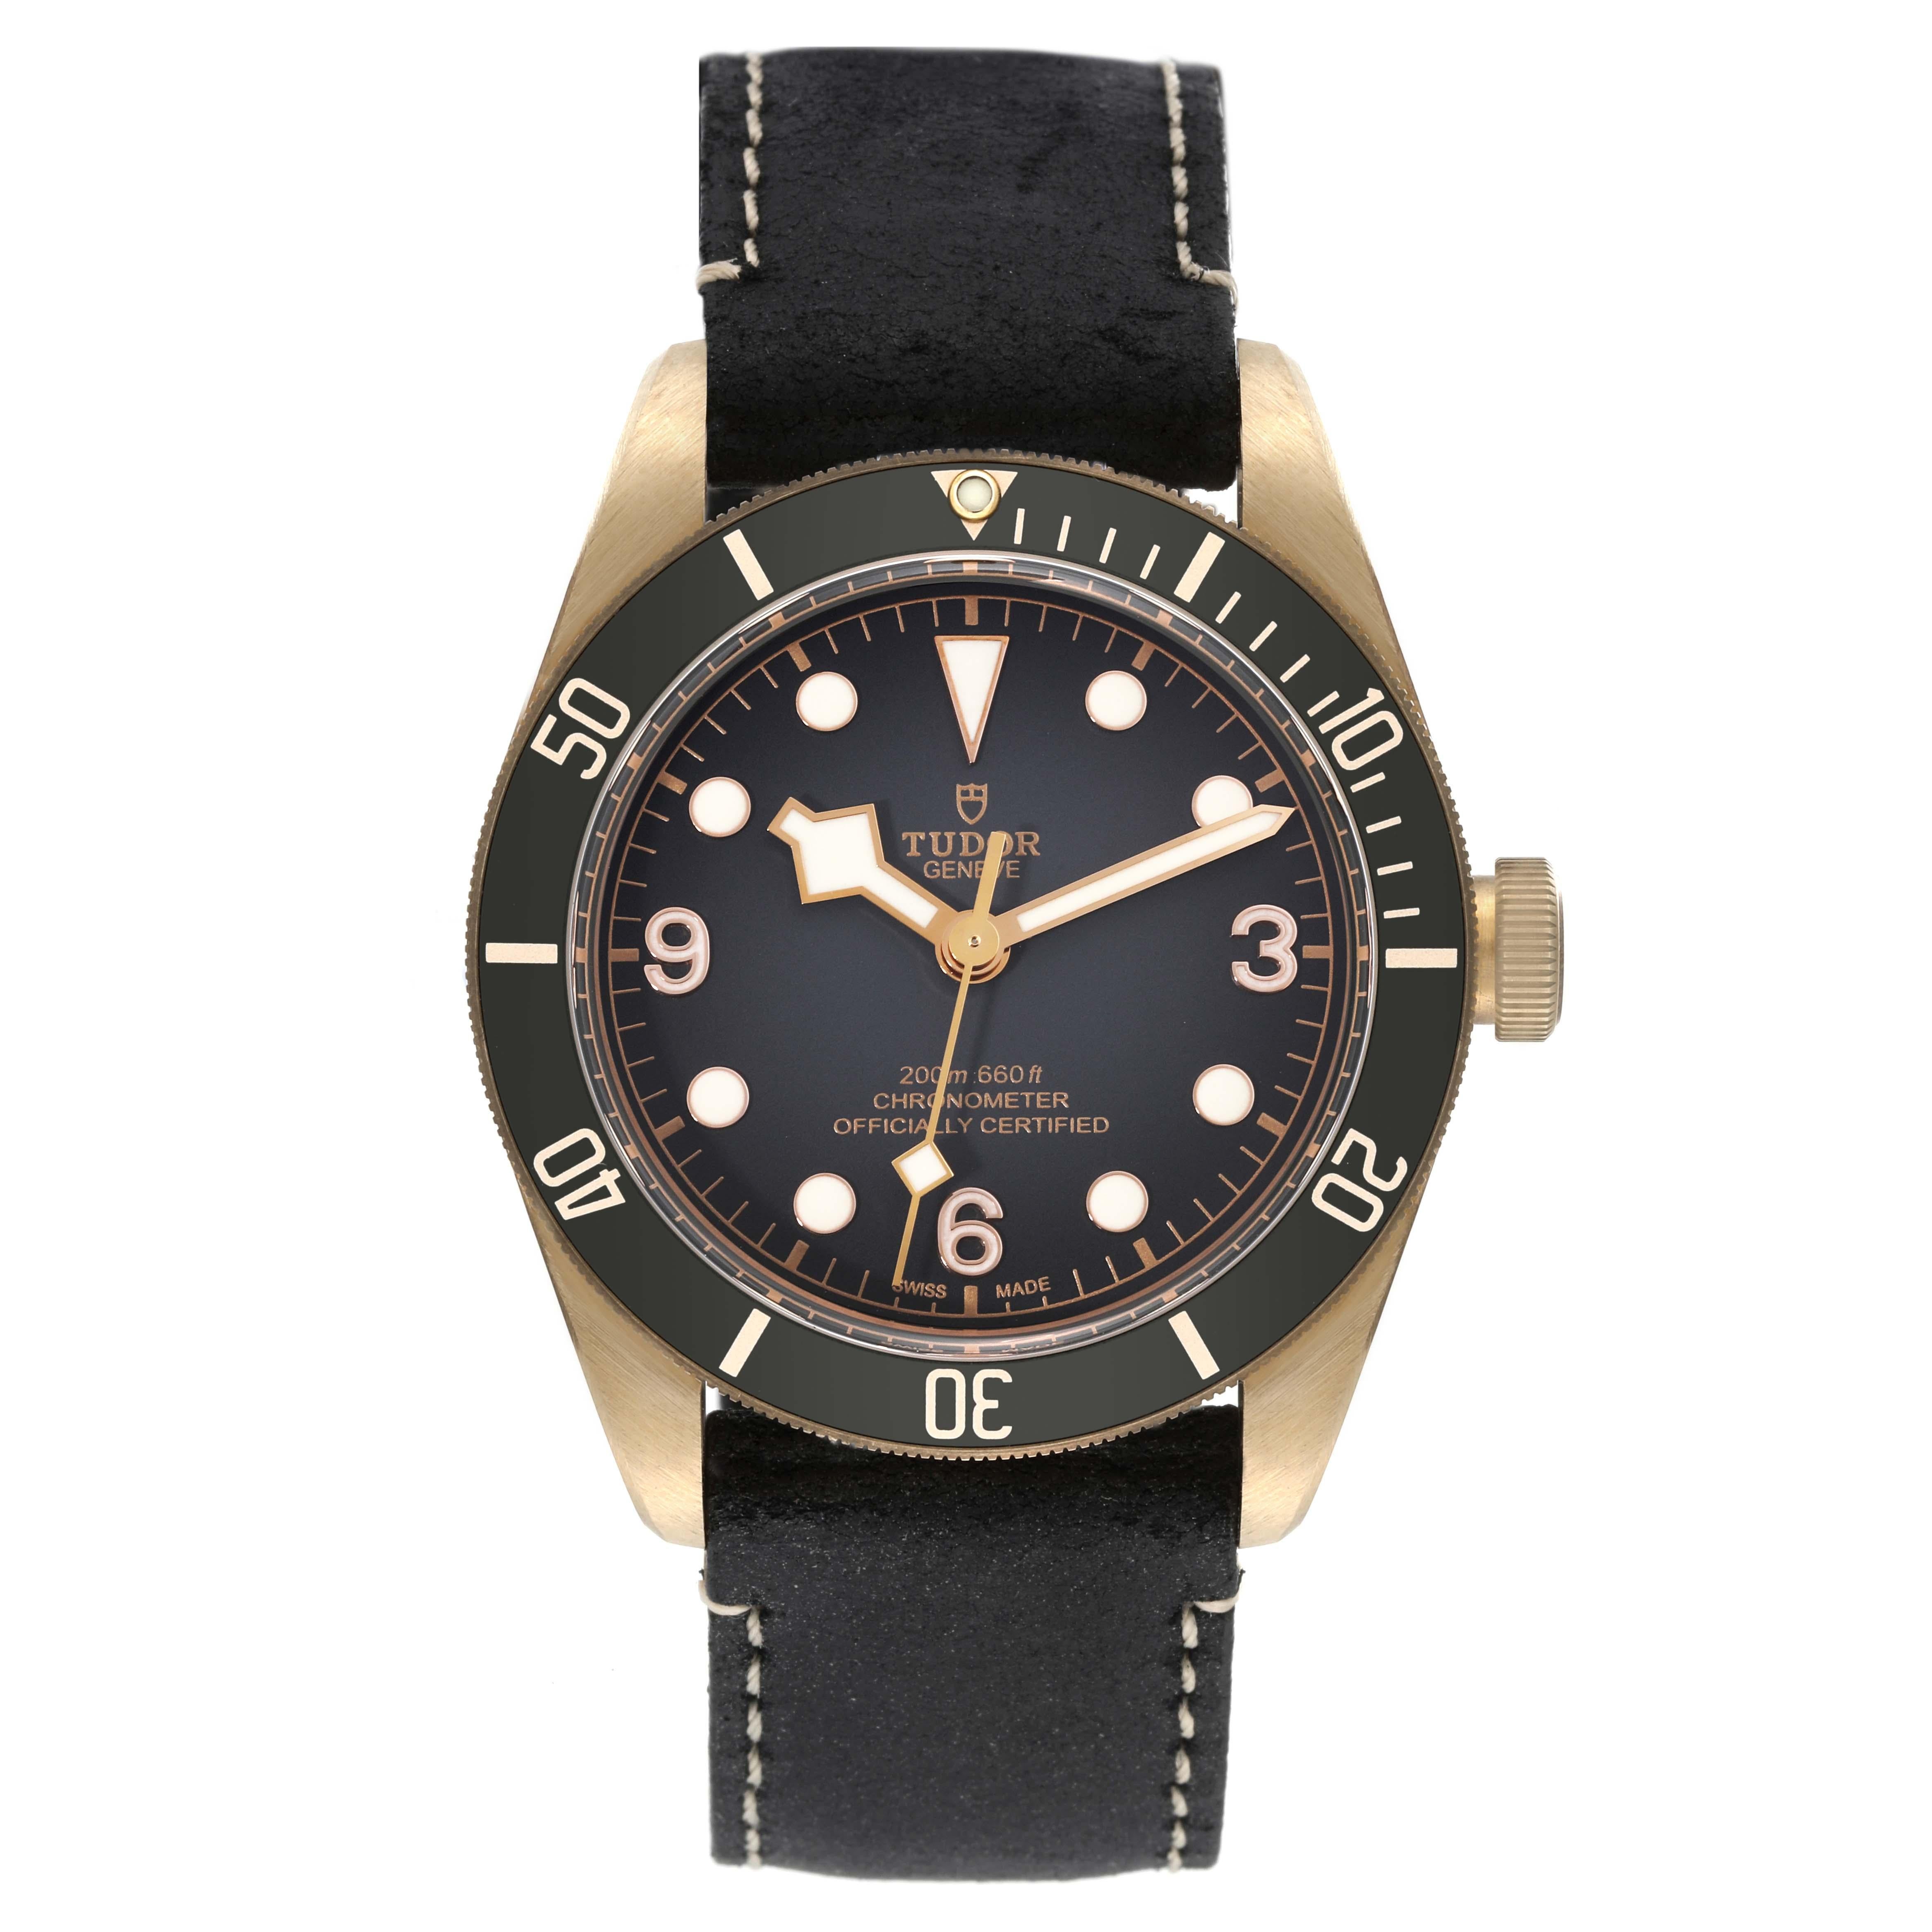 Tudor Heritage Black Bay Bronze Mens Watch 79250 Box Card. Automatic self-winding movement. Bronze oyster case 41.0 mm in diameter. Tudor logo on the crown. Uni-directional rotating bronze bezel with a matte green top ring. Scratch resistant